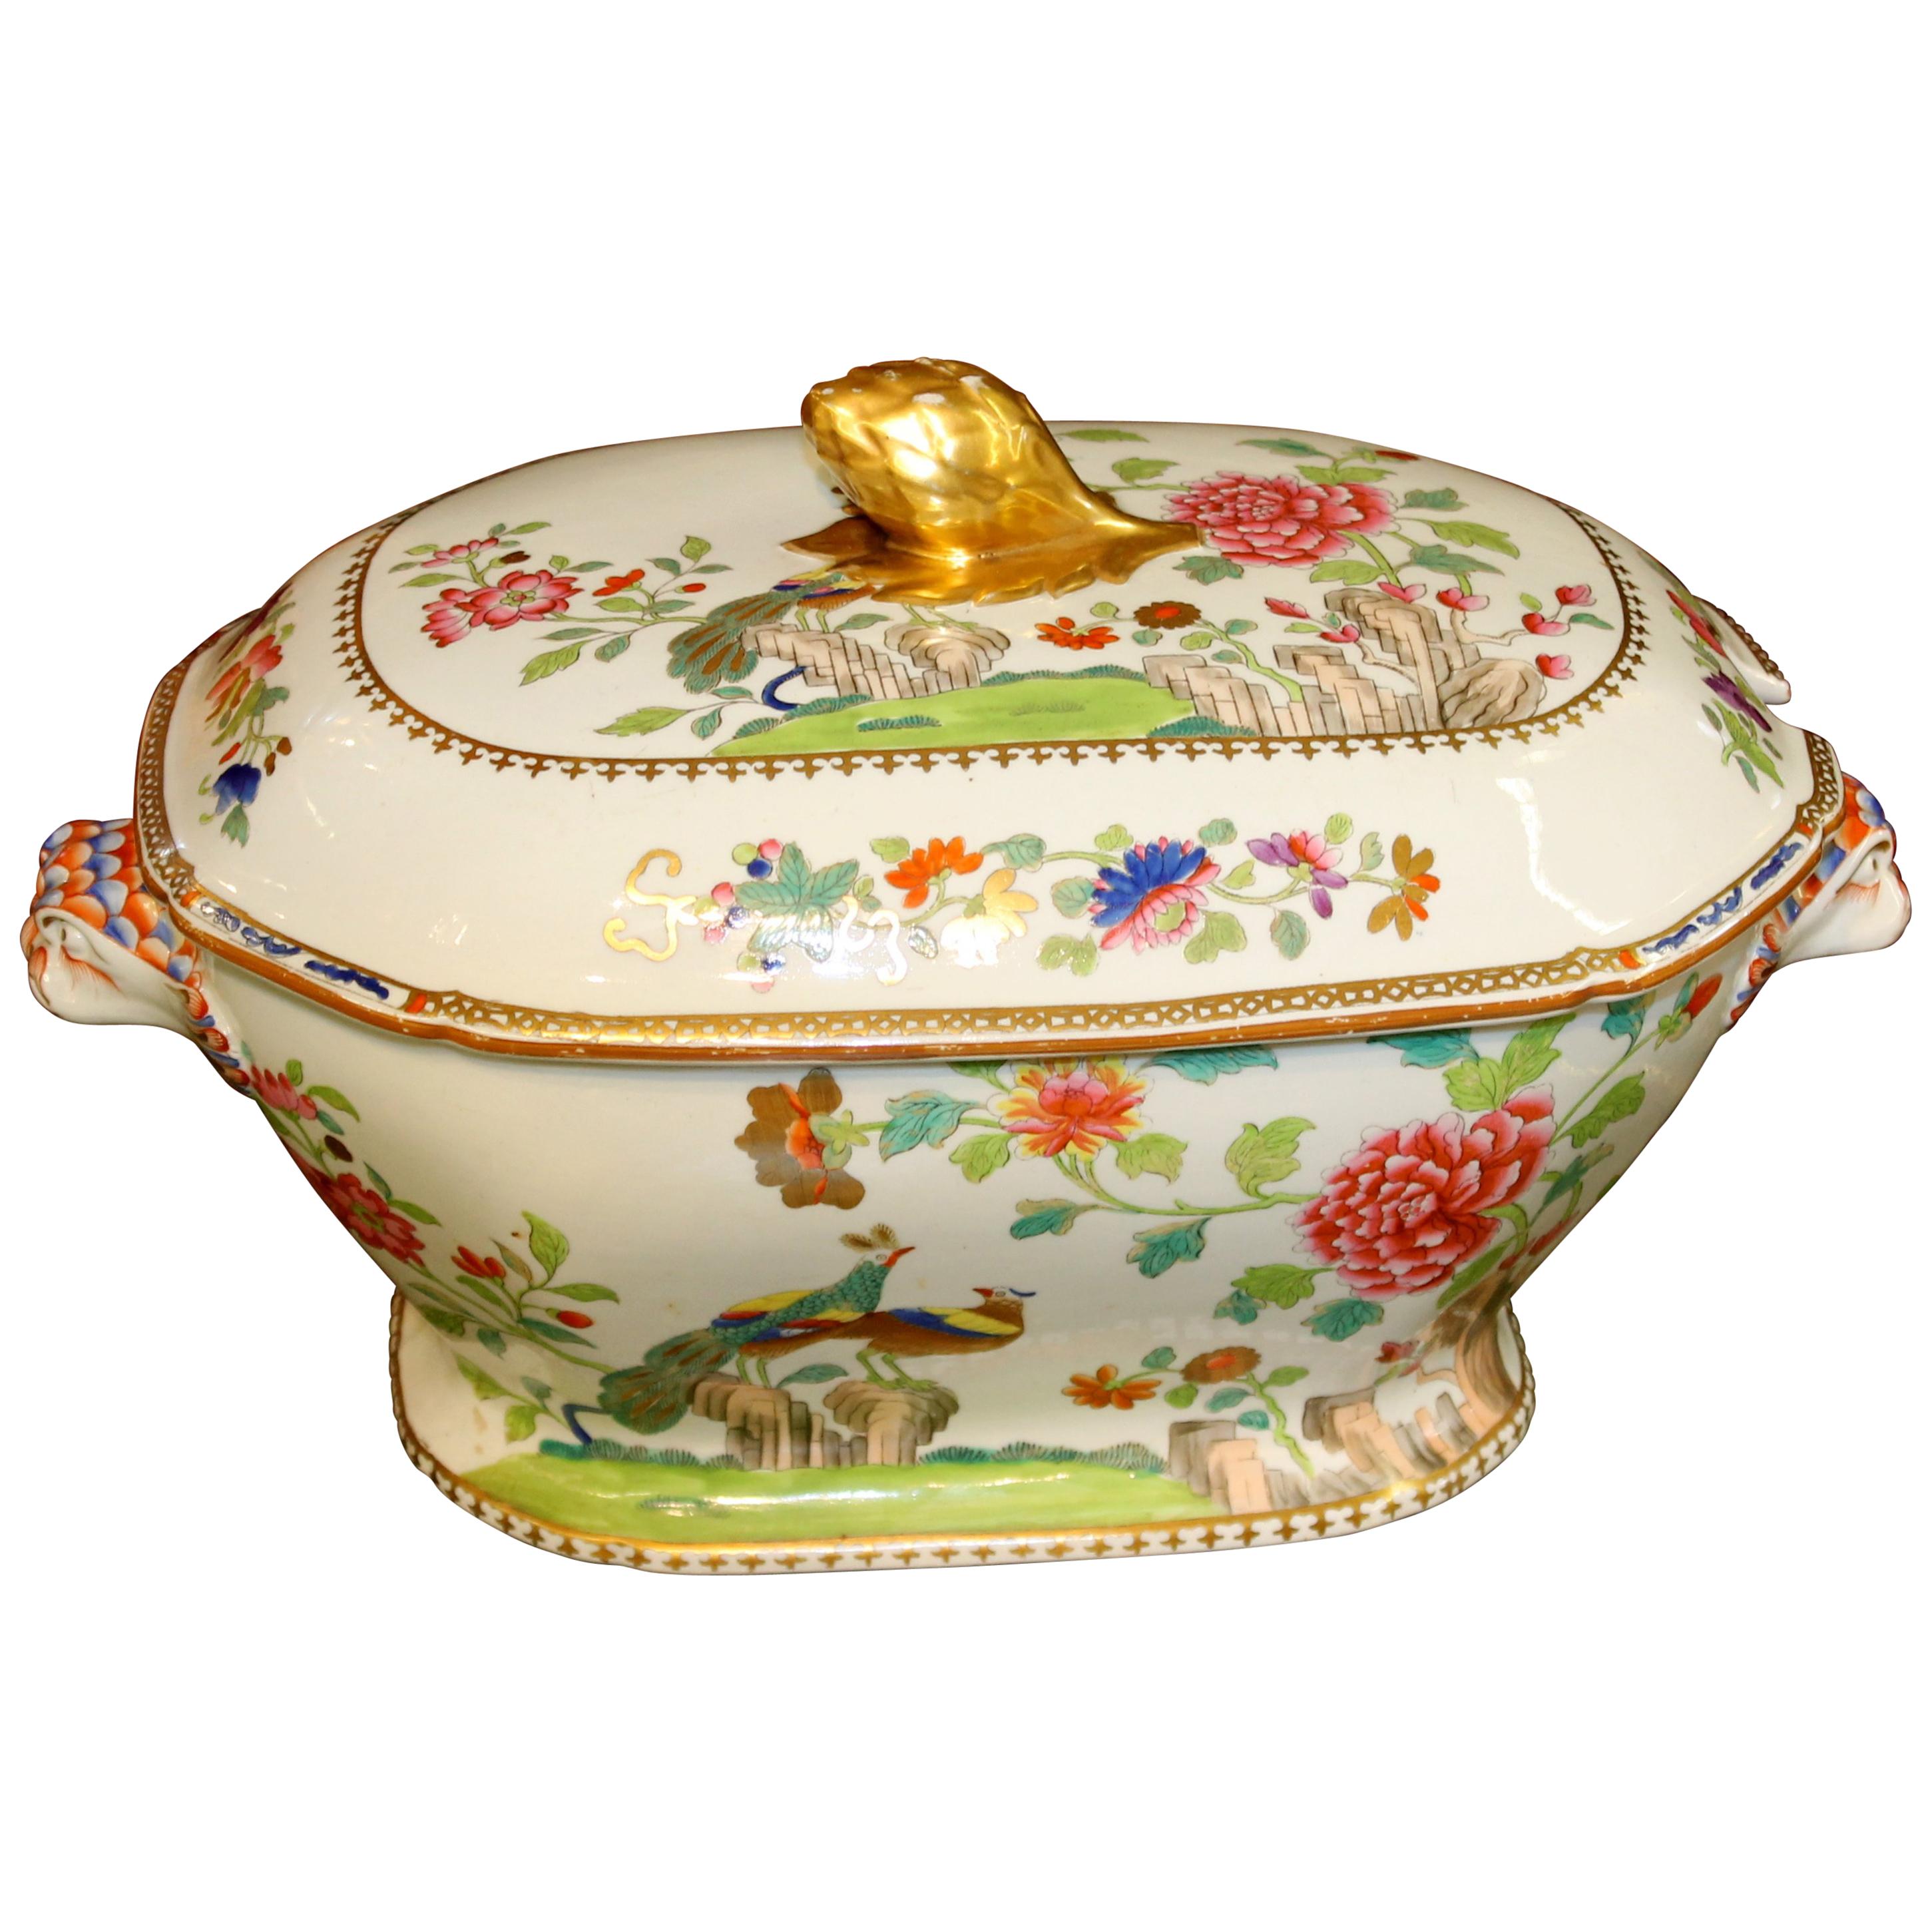 Antique English Early Spode Earthenware "Peacock and Peony" Soup Tureen and Lid